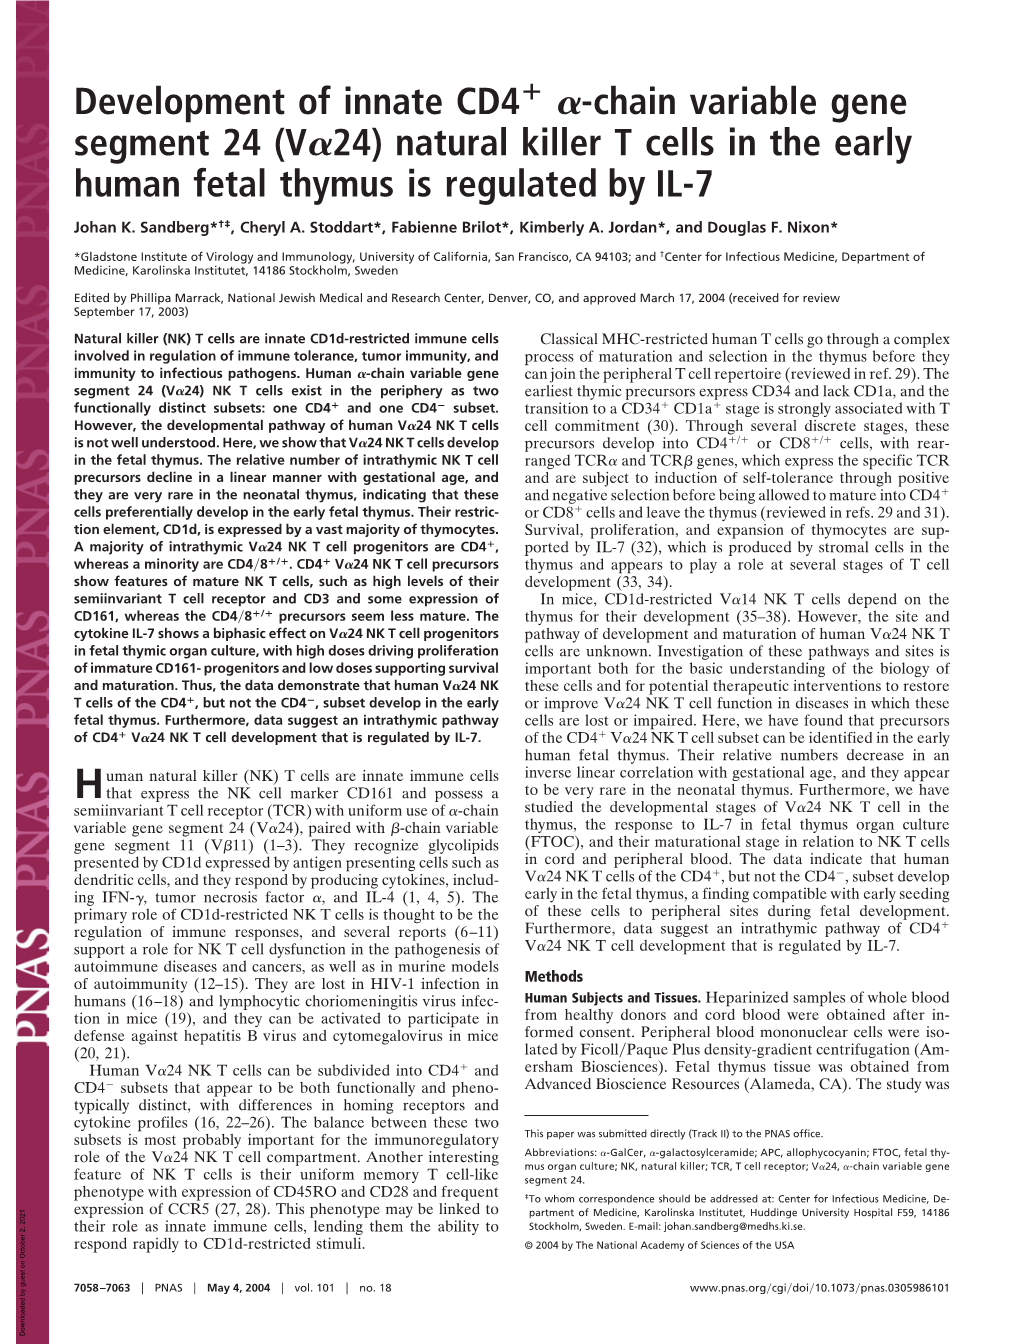 Natural Killer T Cells in the Early Human Fetal Thymus Is Regulated by IL-7